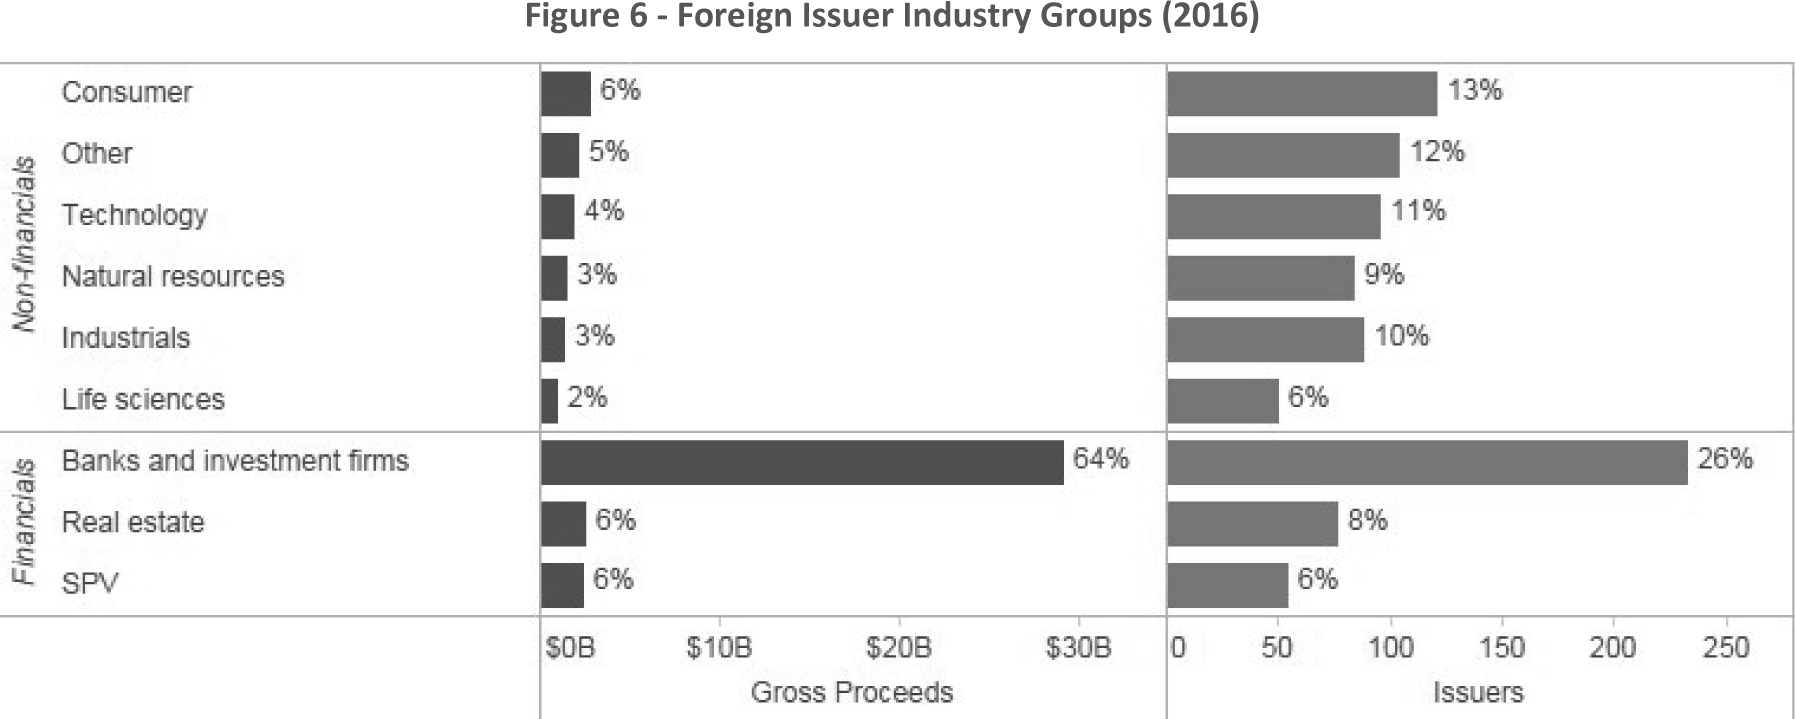 Figure 6 -- Foreign Issuer Industry Groups (2016)